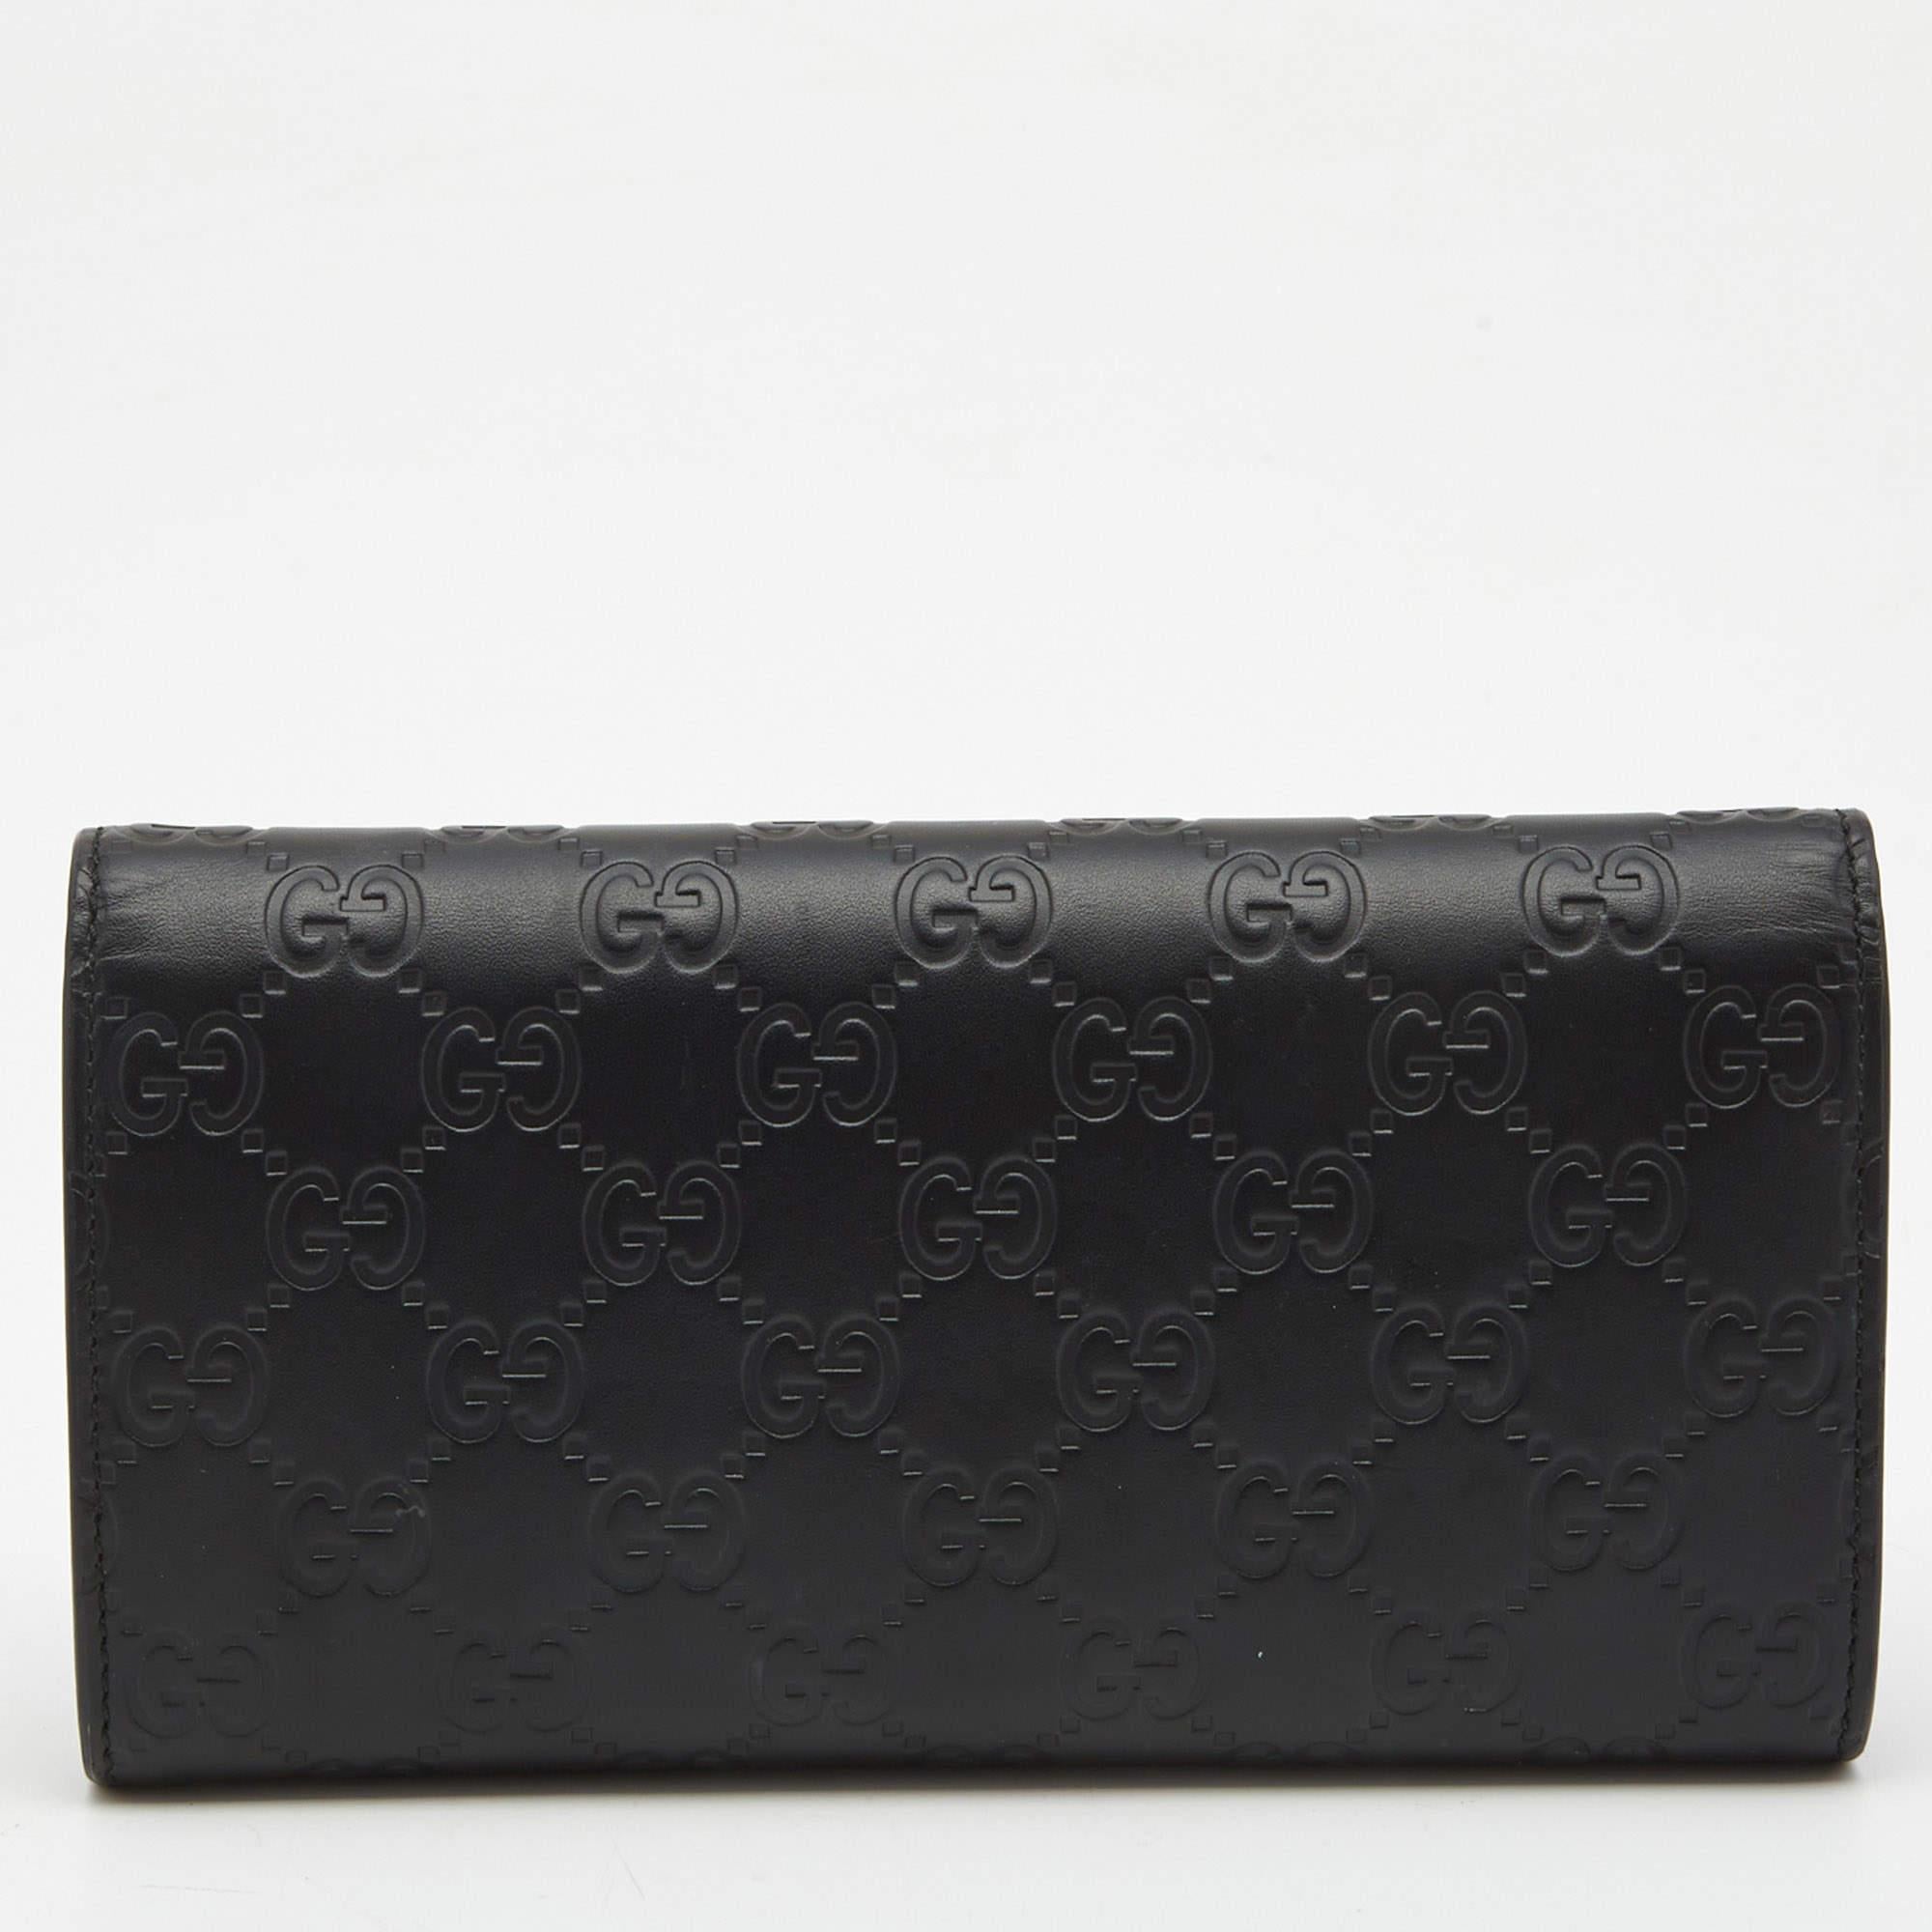 This stylish and practical wallet from the house of Gucci is designed in a gorgeous shade of black from the brand's signature Guccissima leather. Featuring a flap silhouette, this wallet is secured with a snap-button closure and comes with the